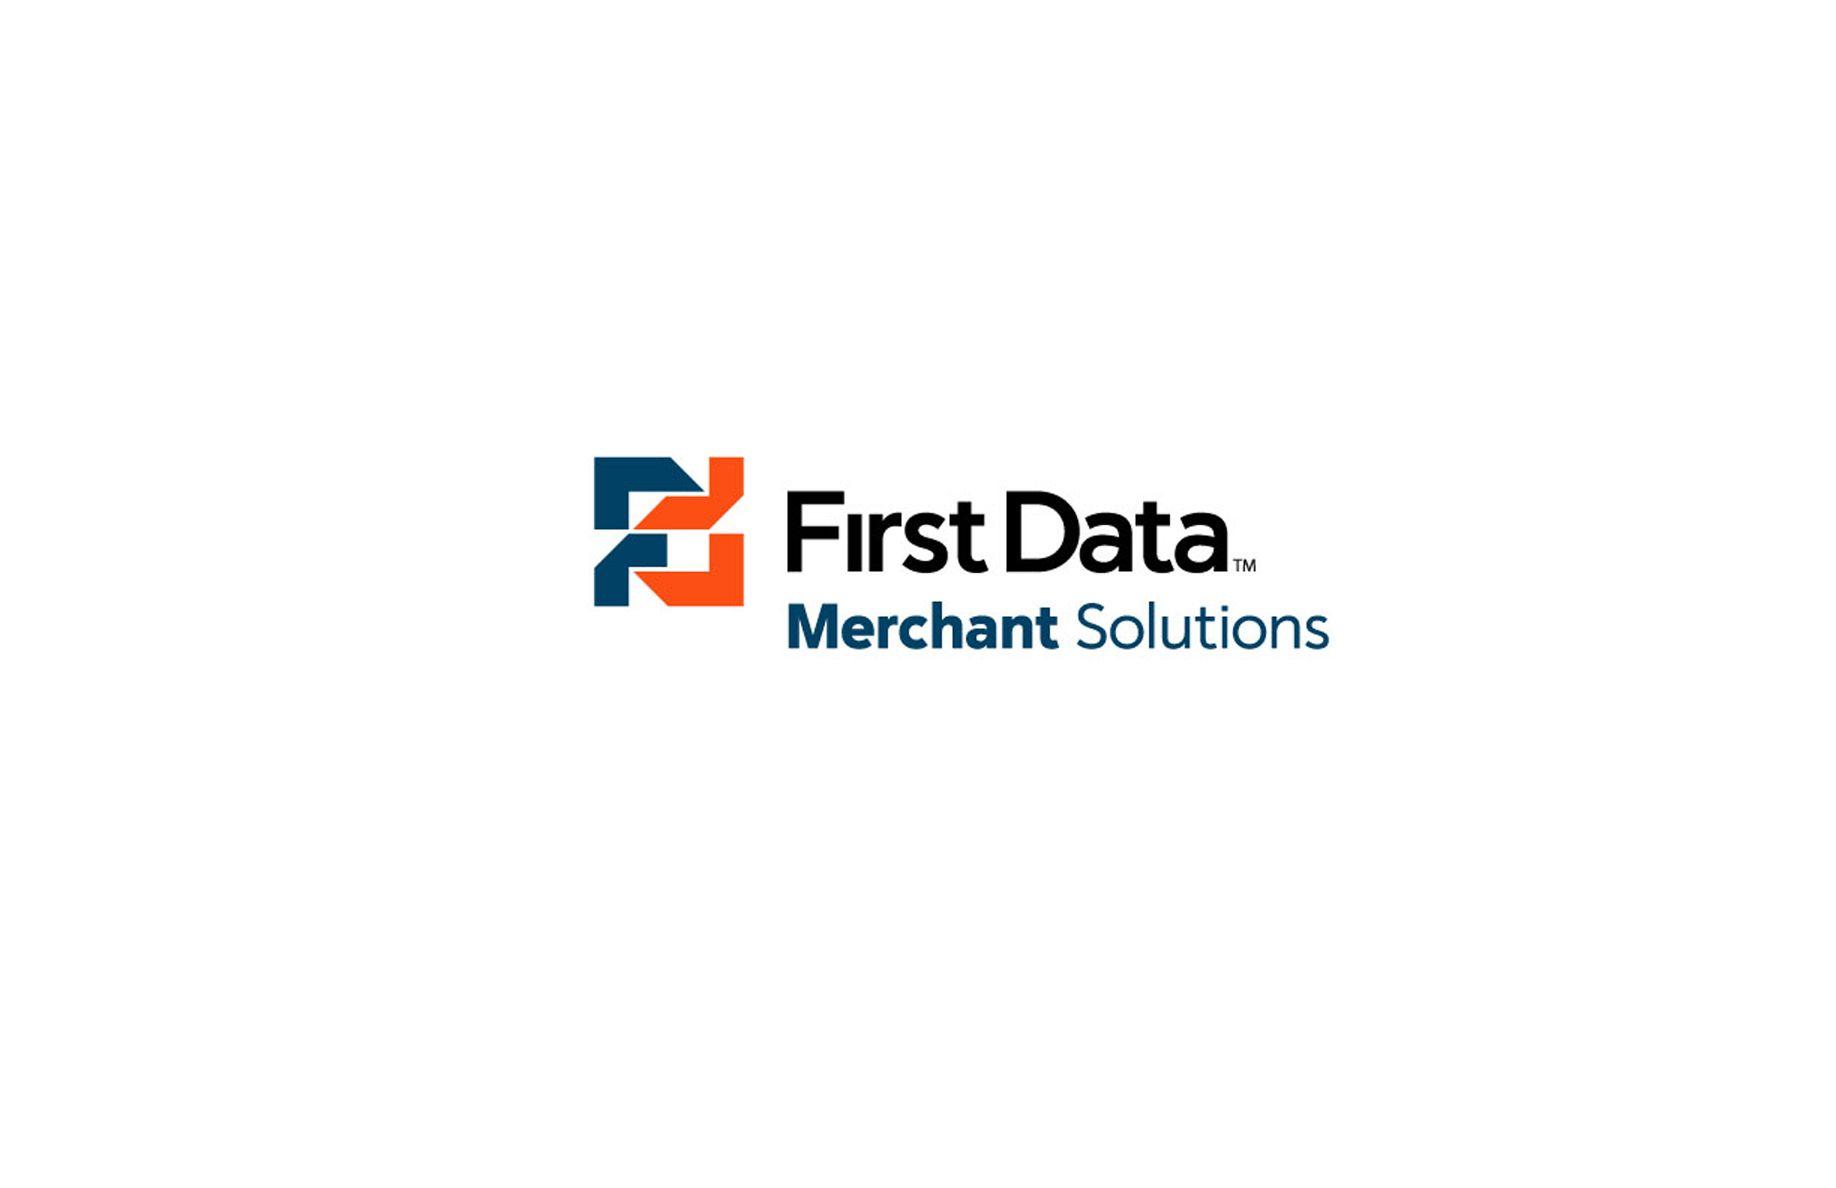 New First Data Logo - Commerce FirstData Connect | Drupal.org